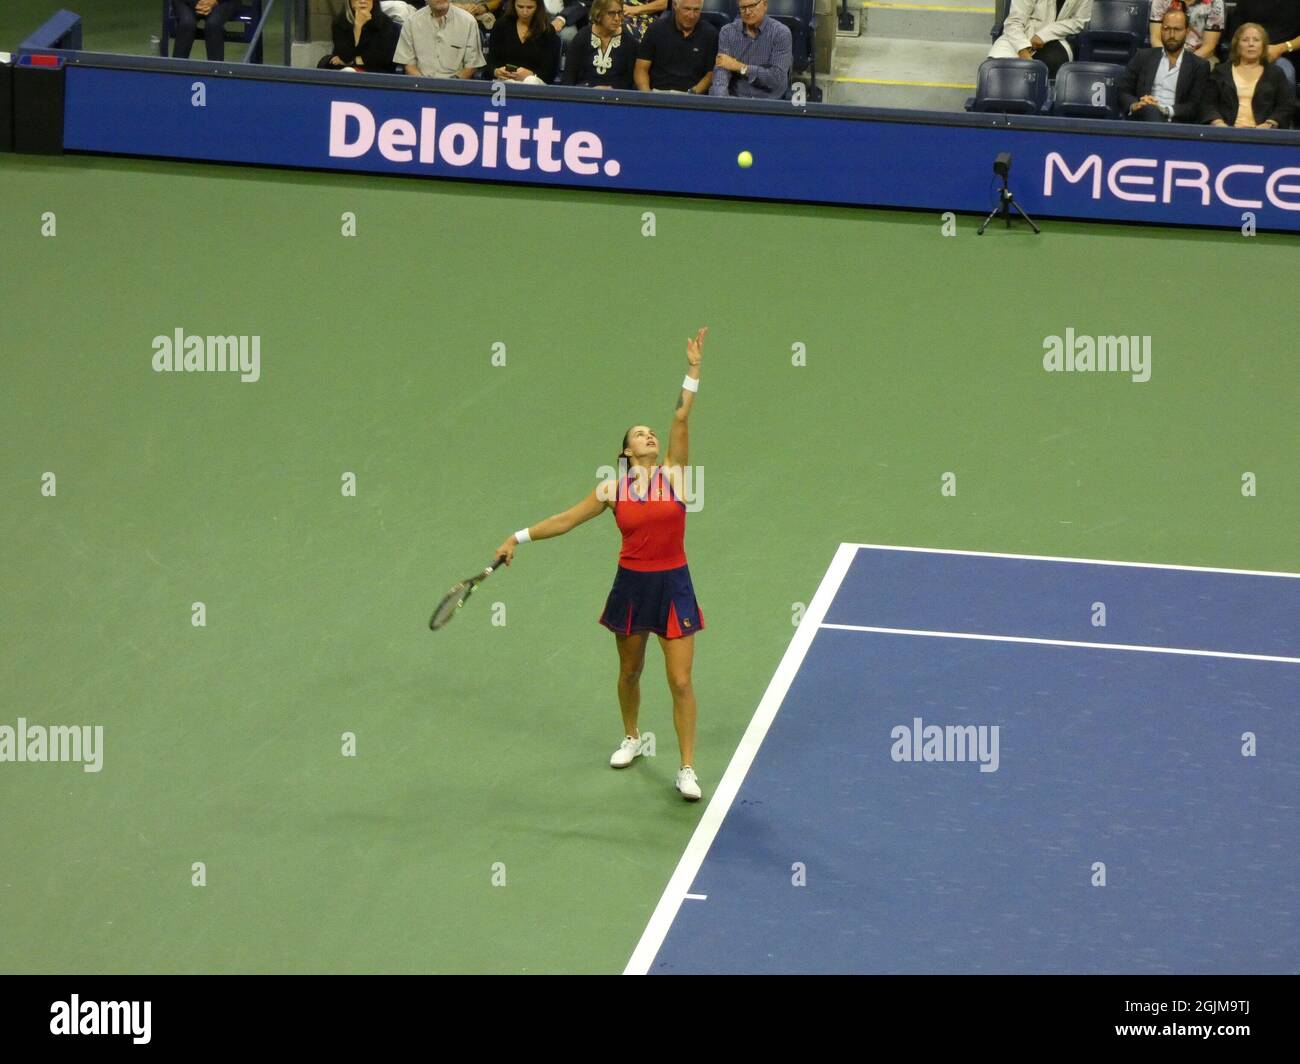 Queens, USA. 10th Sep, 2021. (SPO) Fernandez Prevails over Sabalenka to Advance into Women's Grand Slam Finals Competition at the 2021 USTA US Open Tennis Championships. Sept 9, 2021, Flushing, Queens, NY, USA: In an uncomfortable, nervy and error-riddled match, No.2 seed Aryna Sabalenka of Belarus finally infarcted in an unrecoverable sequence of double faults, thereby ceding to Leylah Fernandez in three sets, 7-6(3), 4-6, 6-4. Fernandez is now propelled into a Final Round teenage showdown with Emma Raducanu at the US Open later this week. (Credit Image: © Julia Mineeva/TheNEWS2 via ZUMA Cred Stock Photo